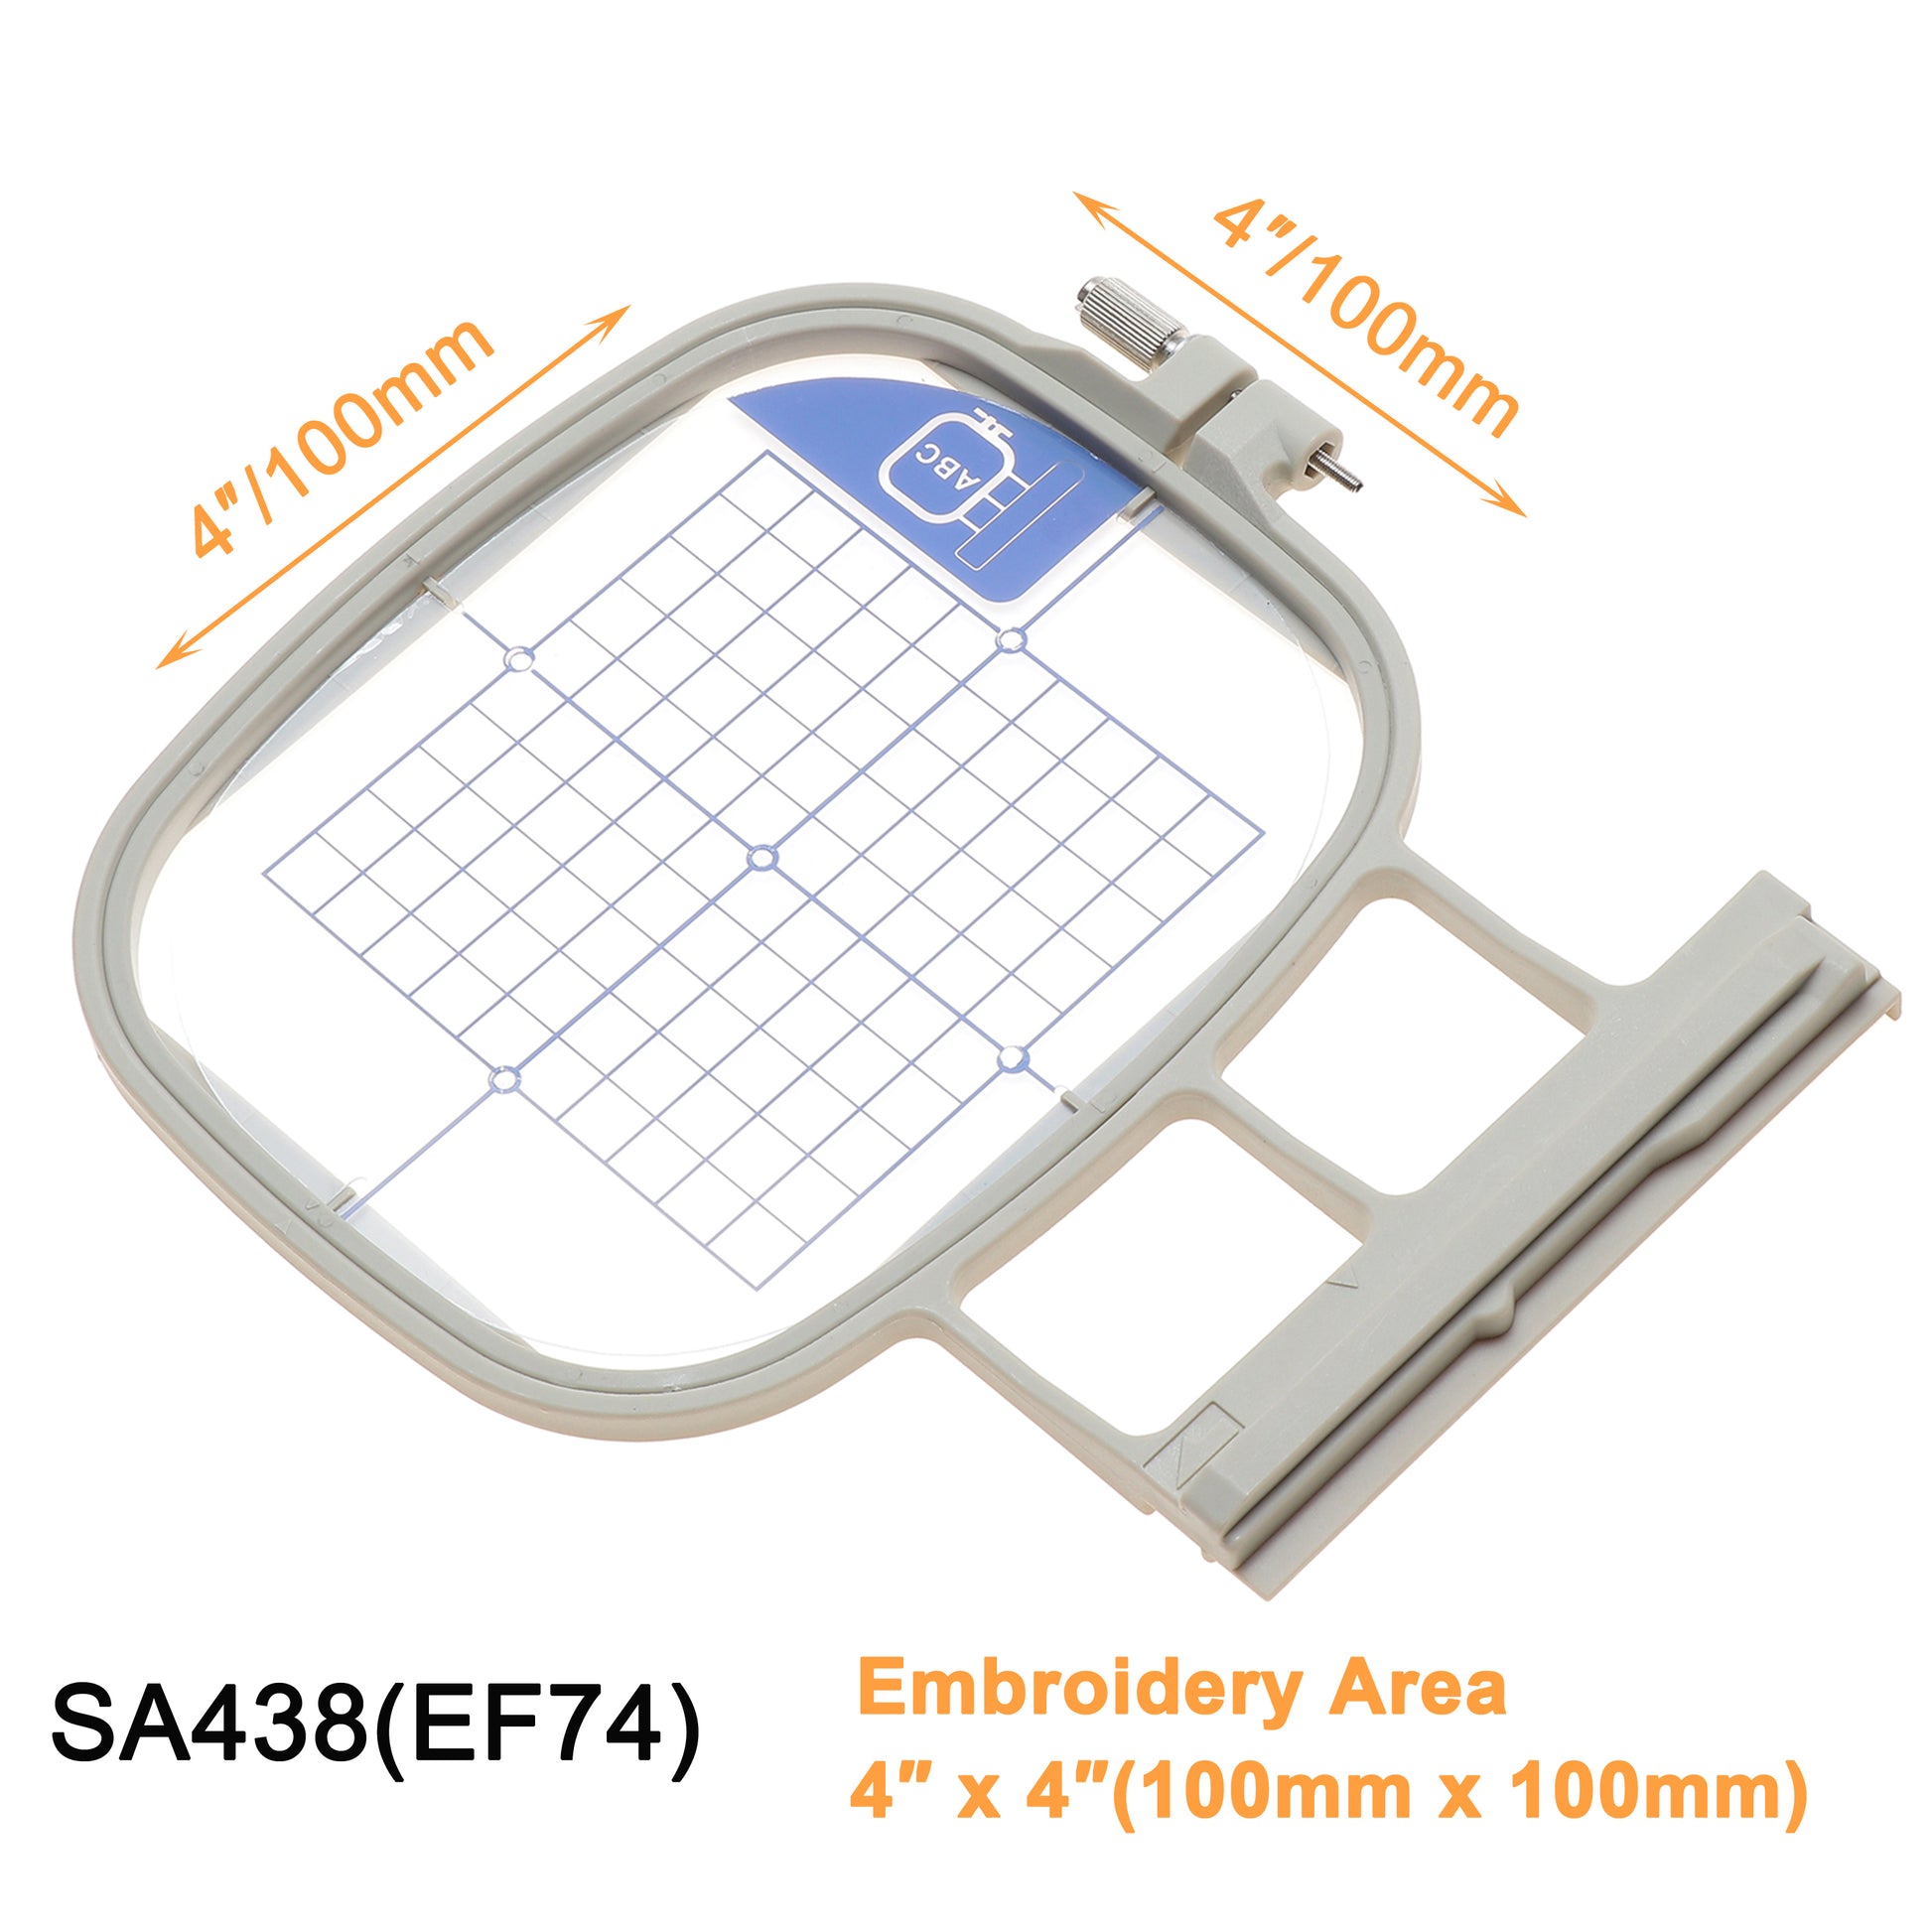 Embroidery Hoops for Brother NQ NV VE VM XE XJ XV Models - Brother  Embroidery Machine Hoops - Embroidery Machine Hoops - Embroidery